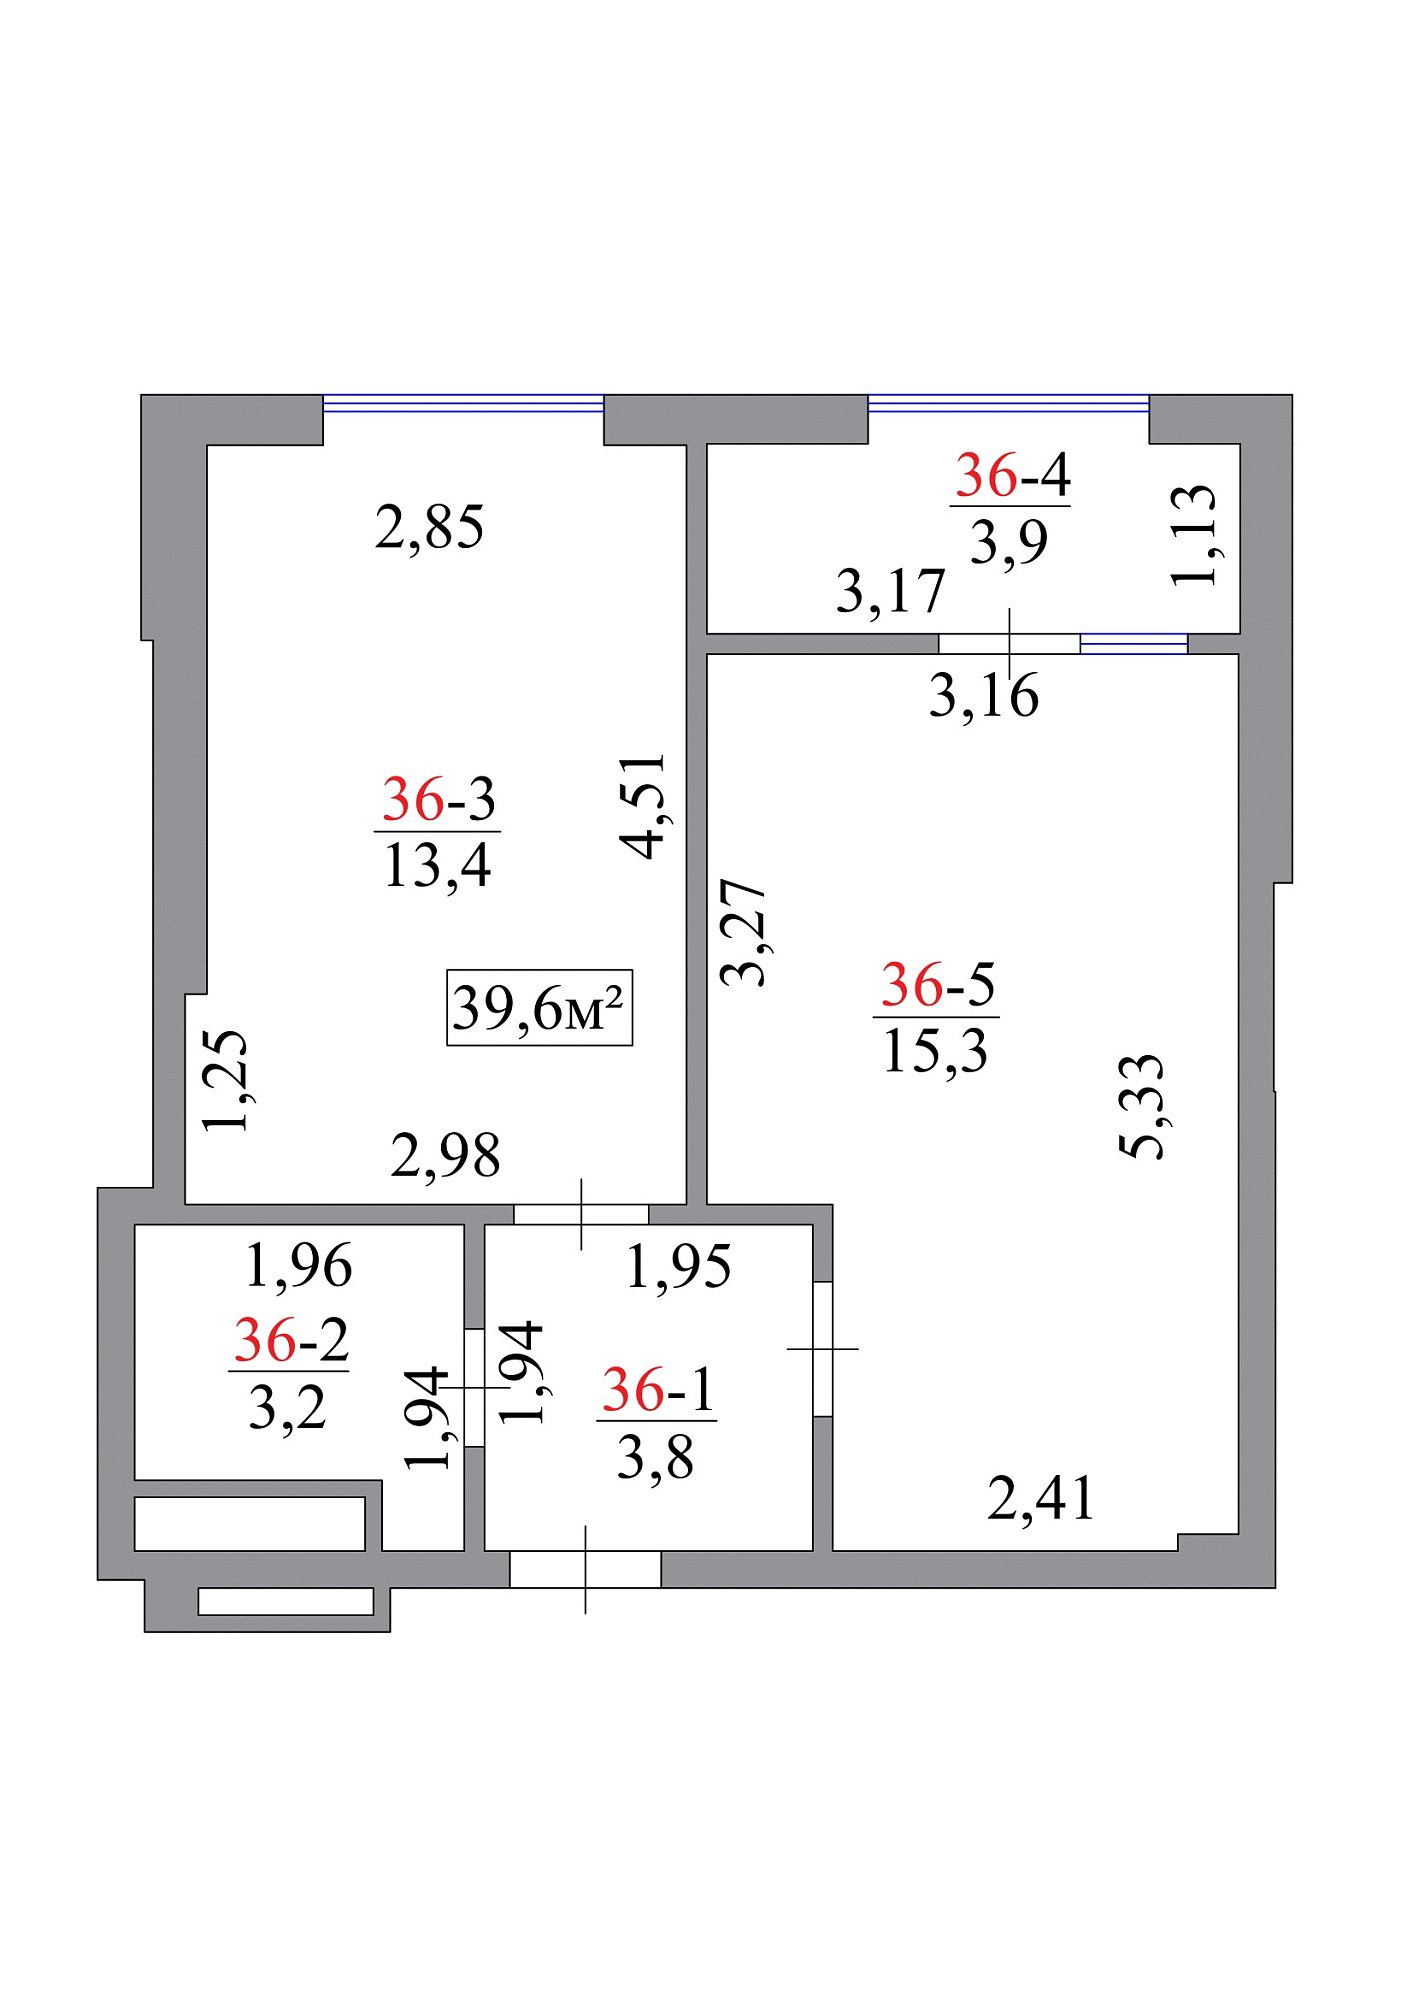 Planning 1-rm flats area 39.6m2, AB-07-04/00033.